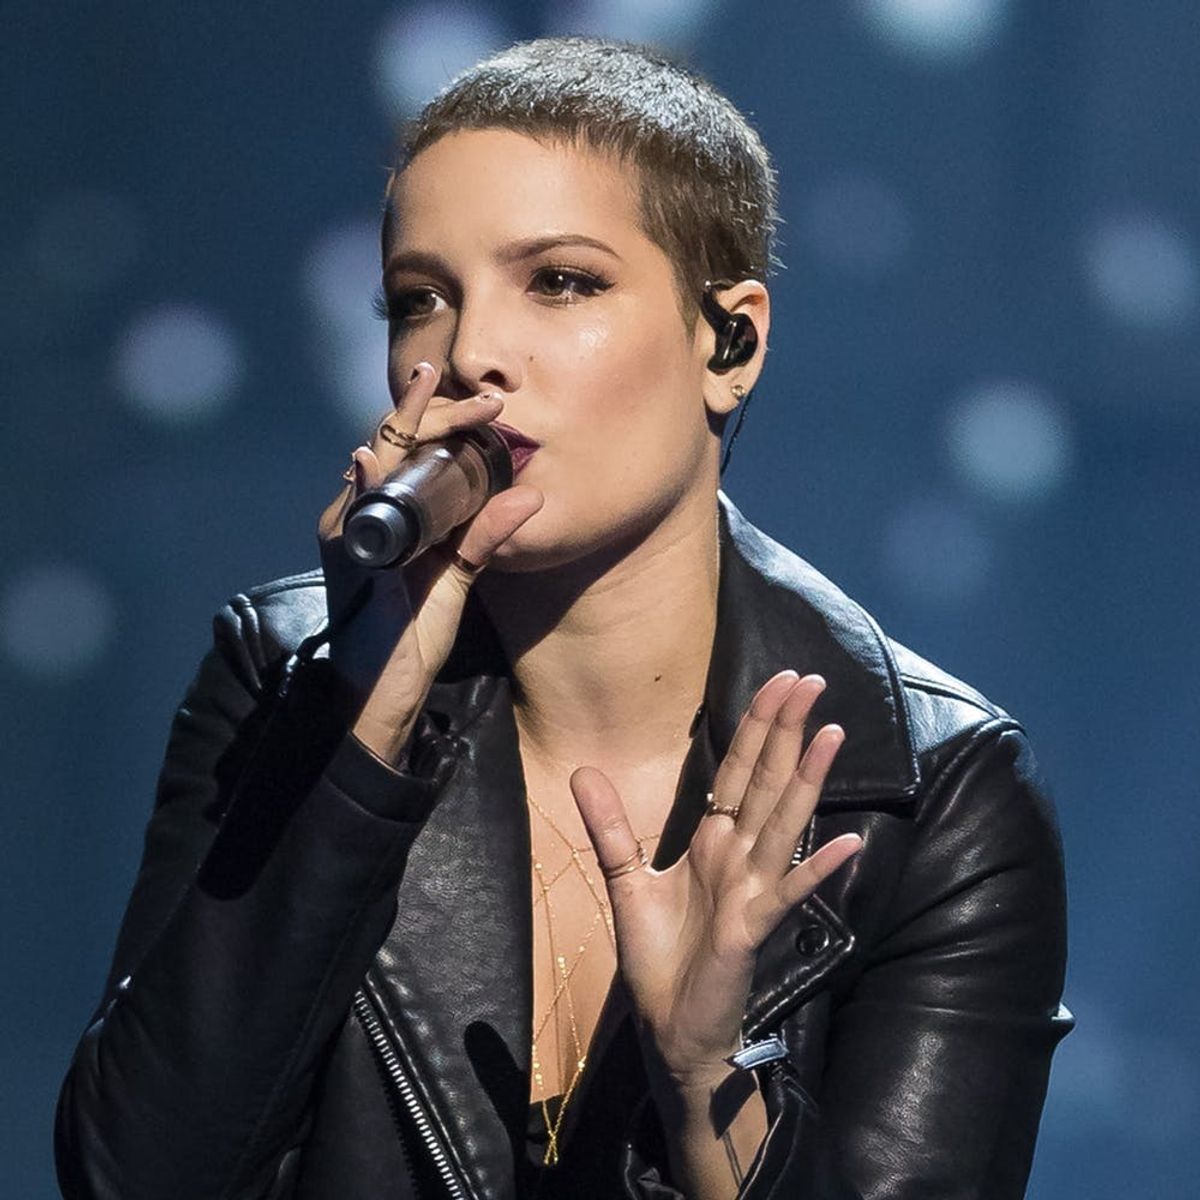 This Is the Debilitating Condition Halsey Just Opened Up About Needing Surgery For